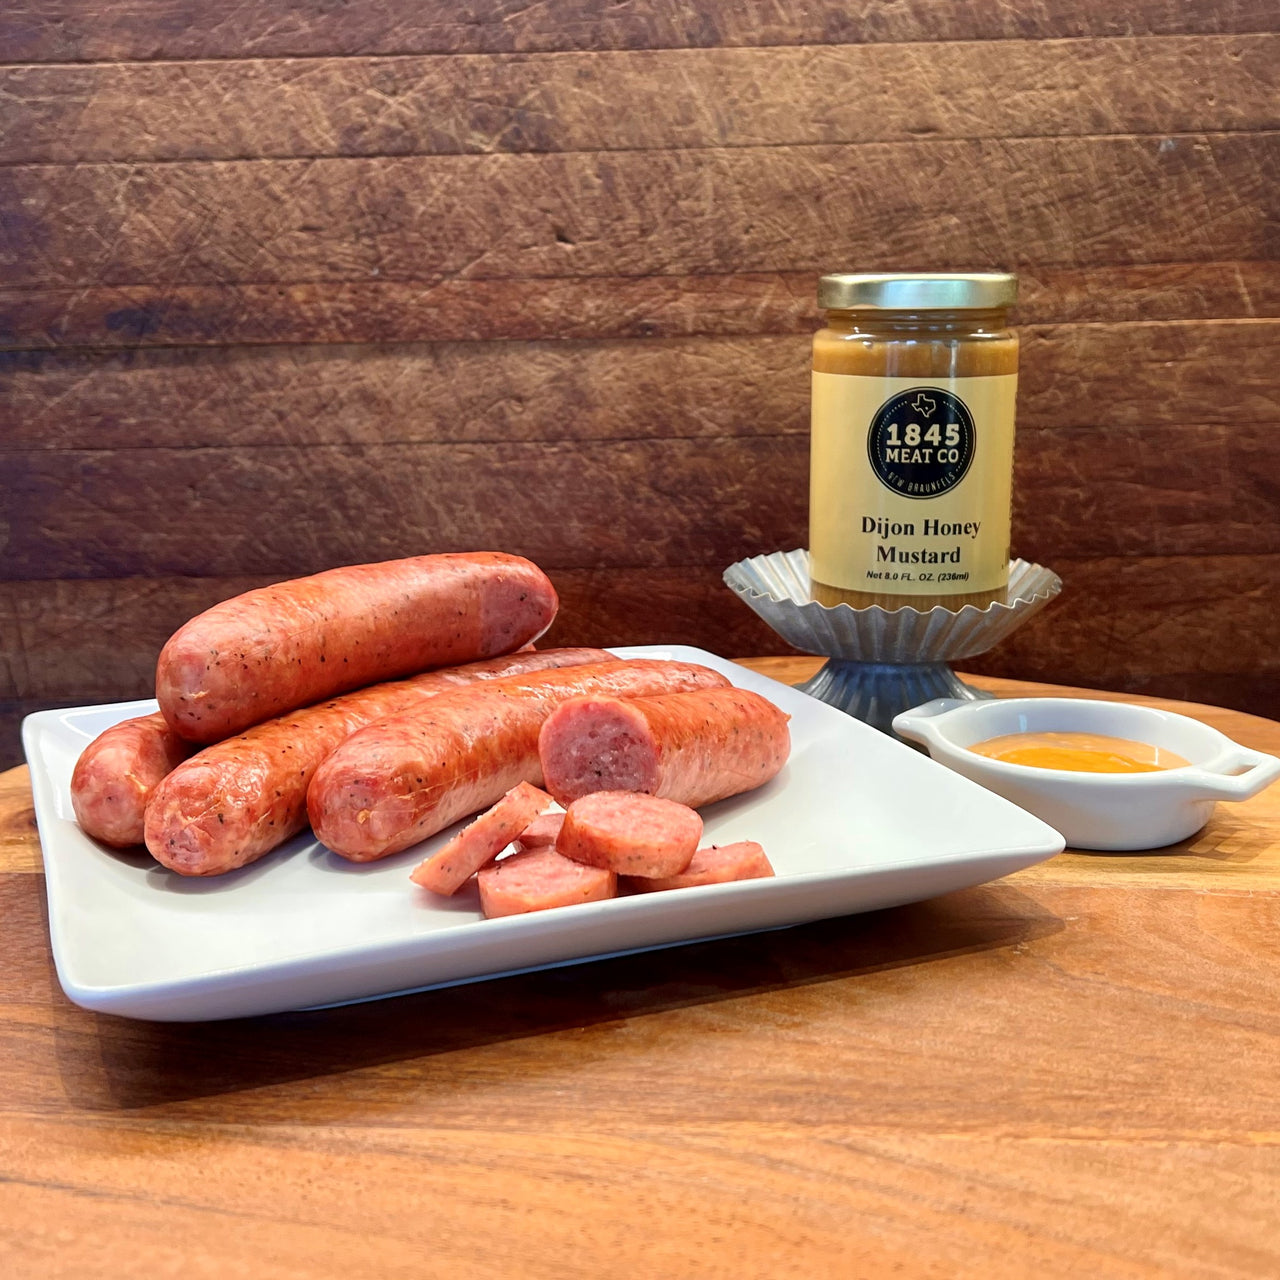 A classic Dijon Honey Mustard that is a perfect complement to our smoked meats and cheeses.  Also great on your sandwich or as a dressing on your next salad!